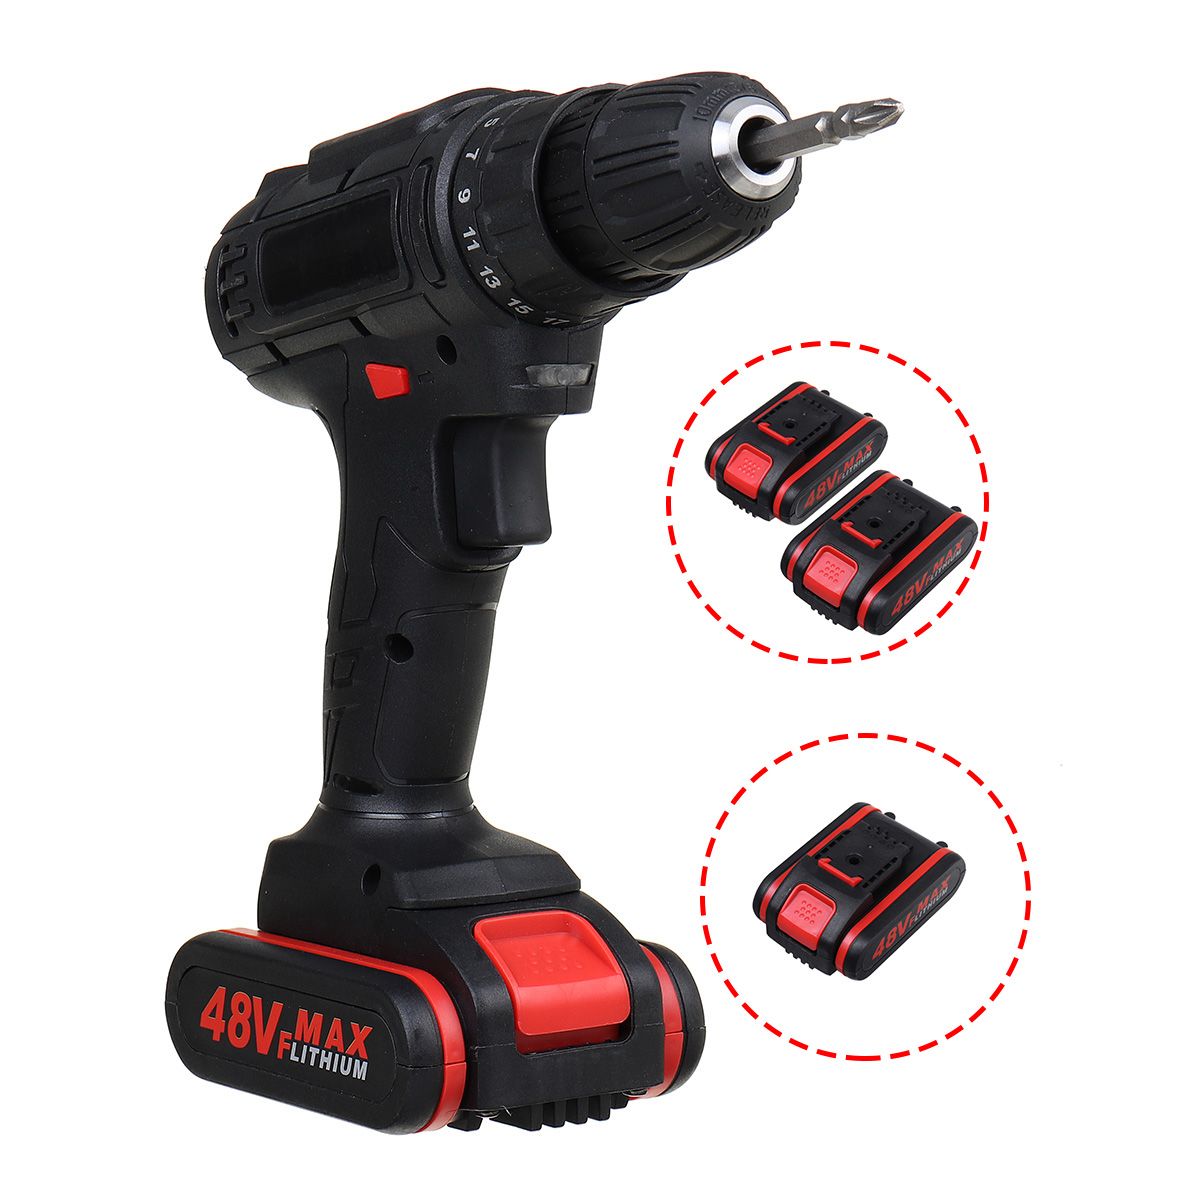 48V-1500mah-Electric-Cordless-Drill-Mini-Drill-Lithium-Ion-Battery-Electric-Hand-Drill-Driver-28Nm-P-1675921